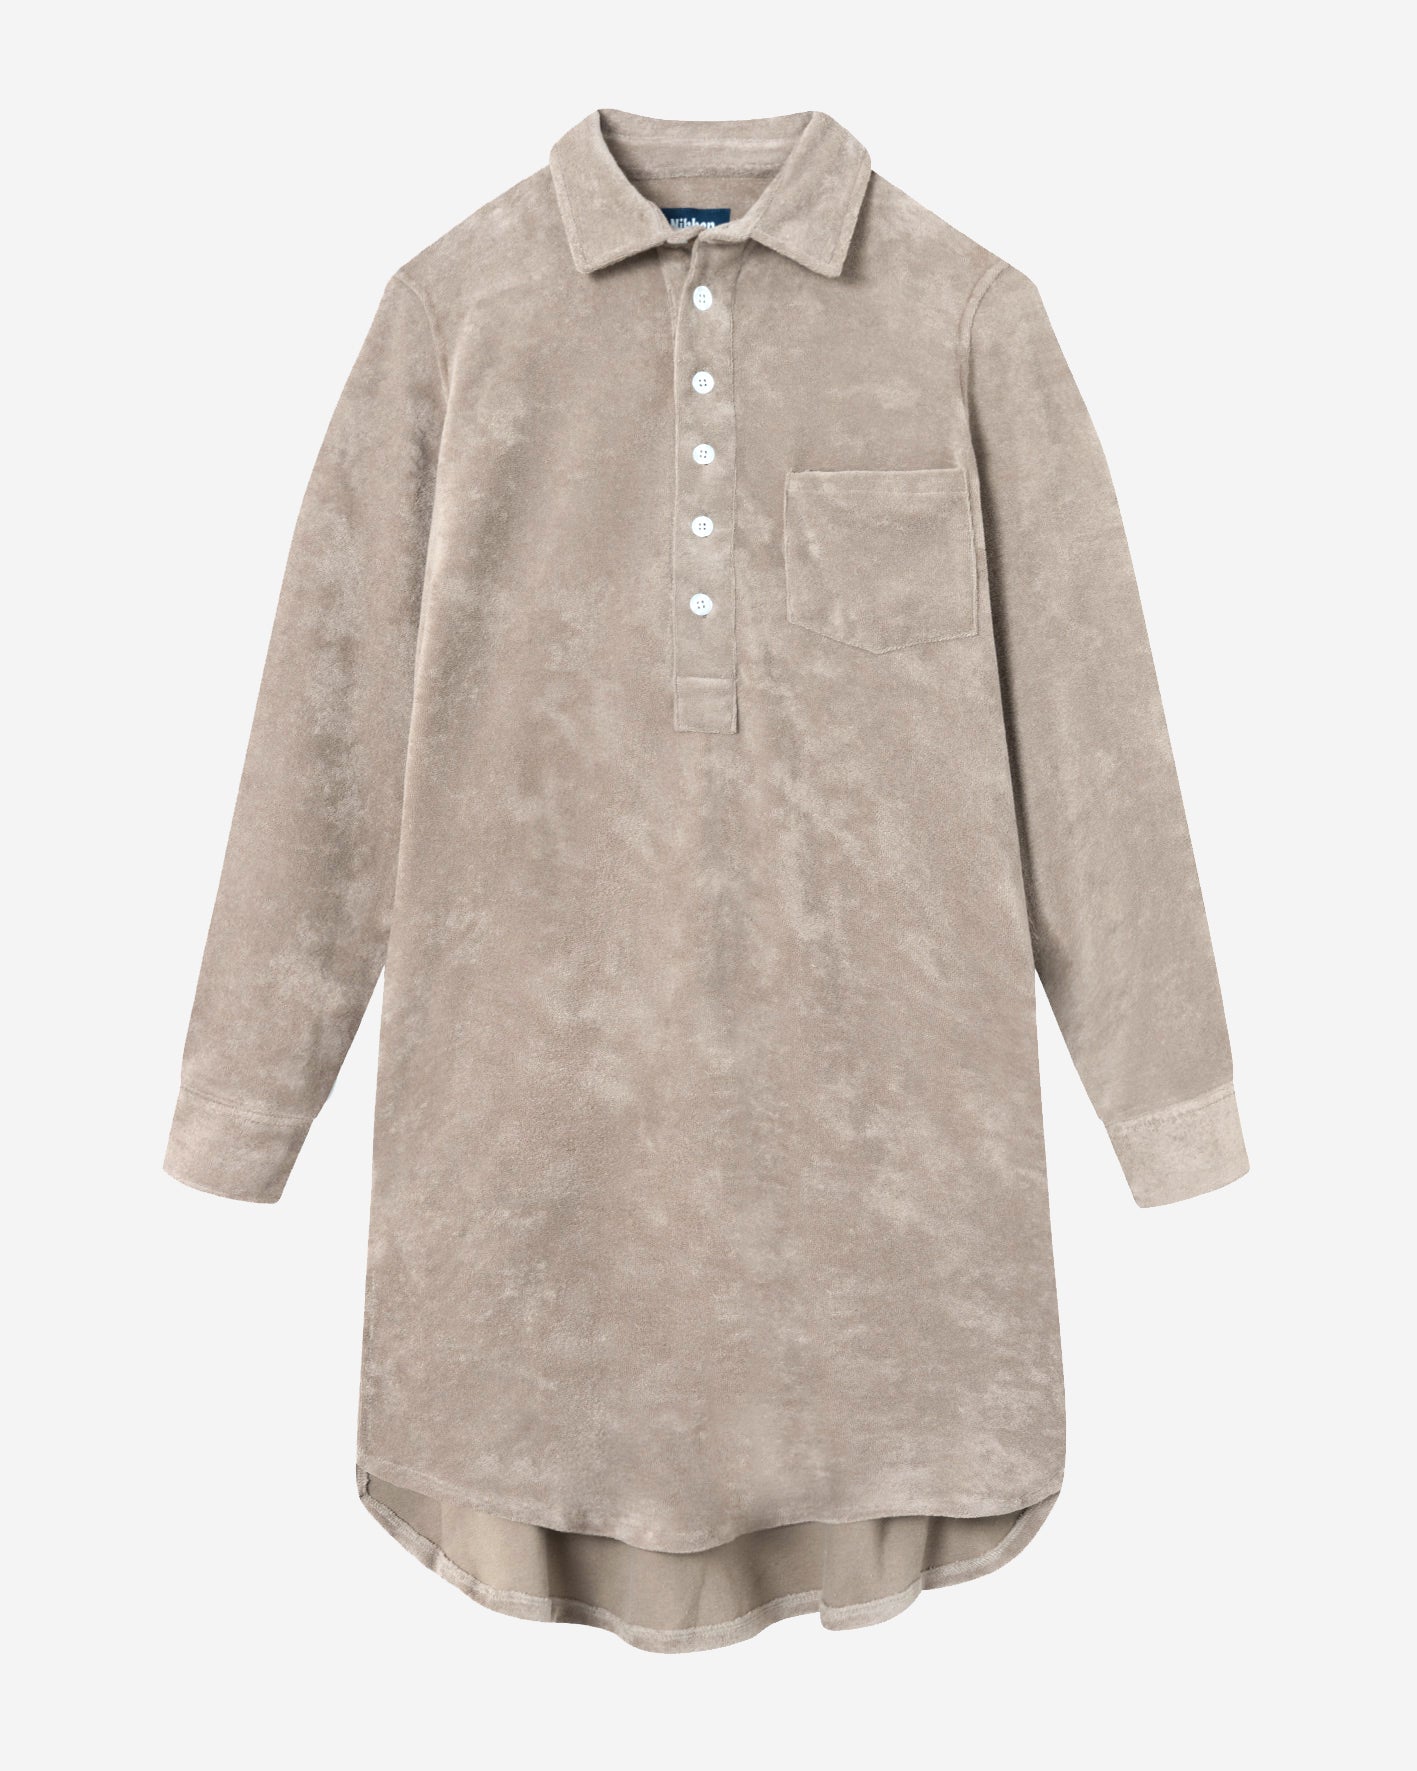 Long shirt in cashmere beige color